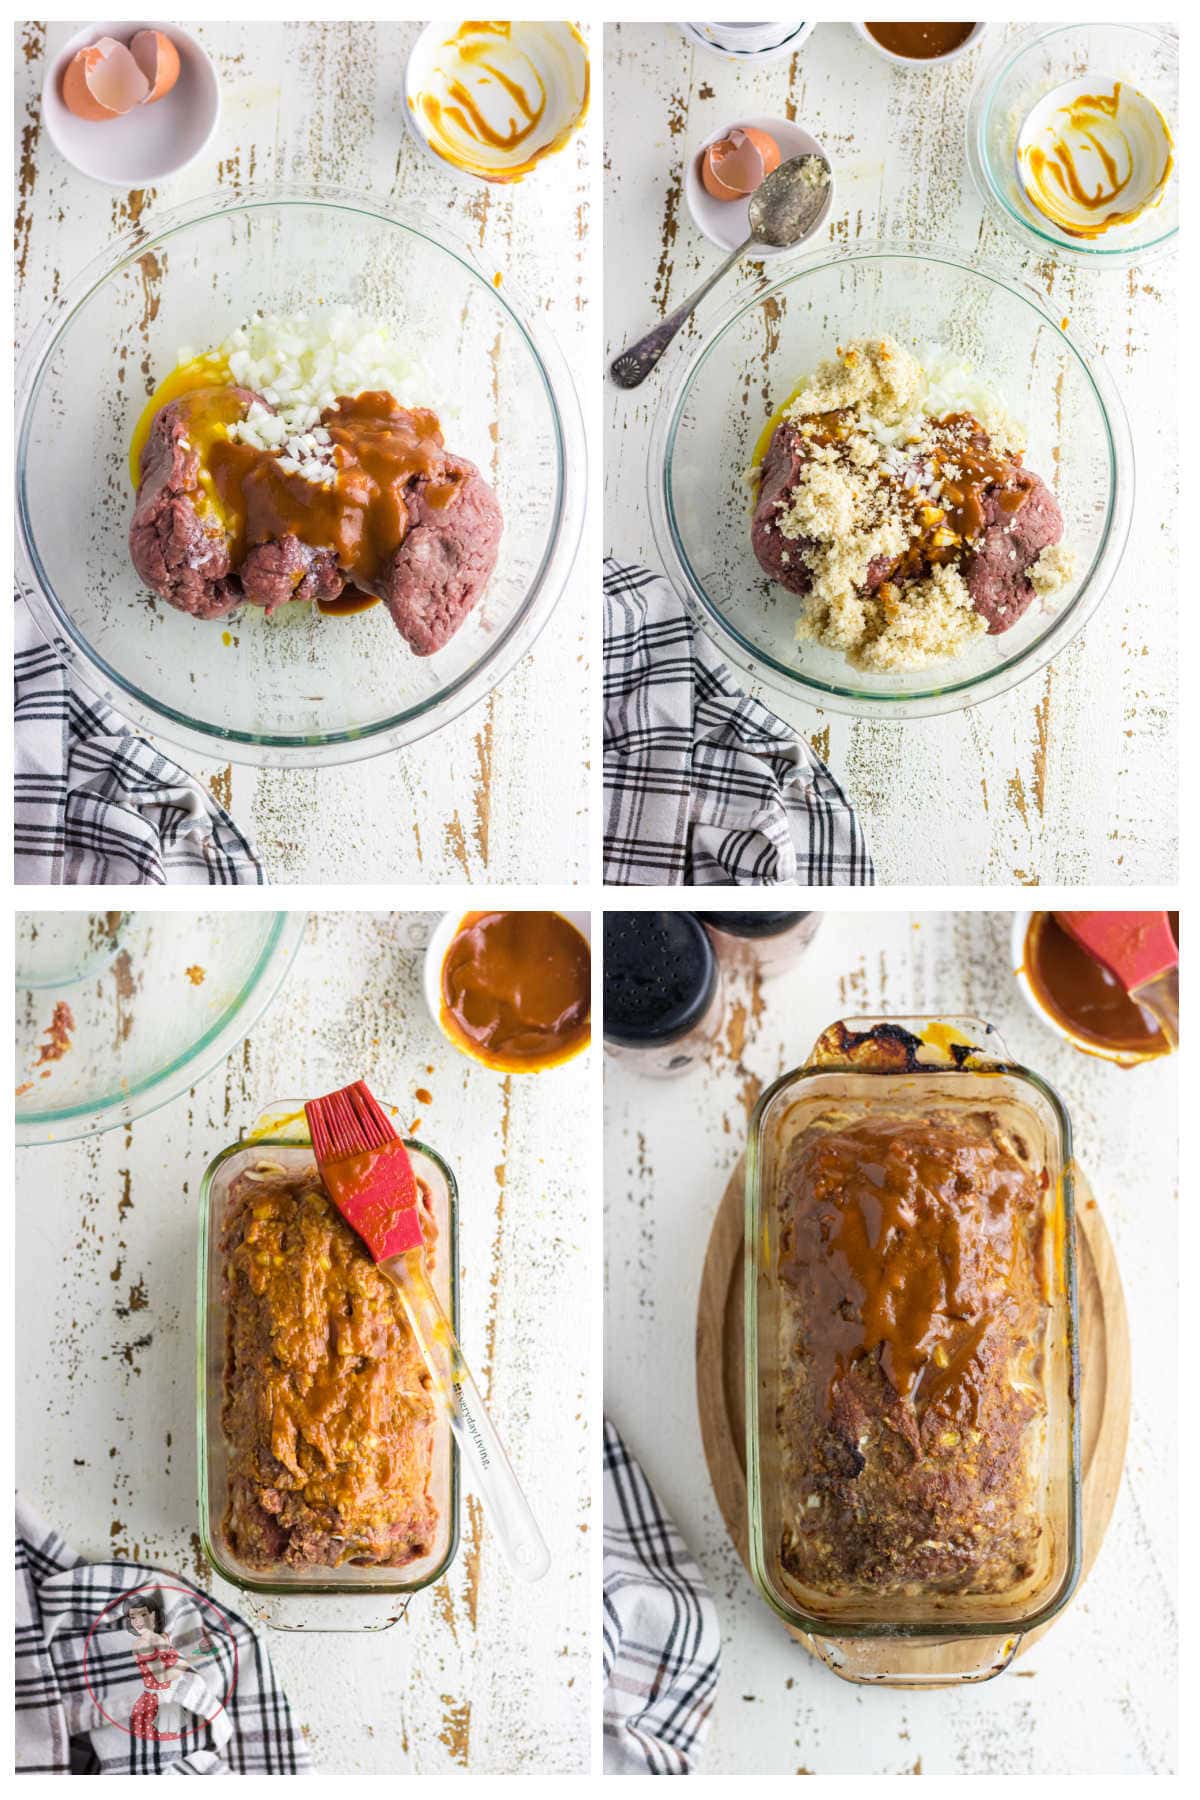 Step by step images showing how to make meatloaf.